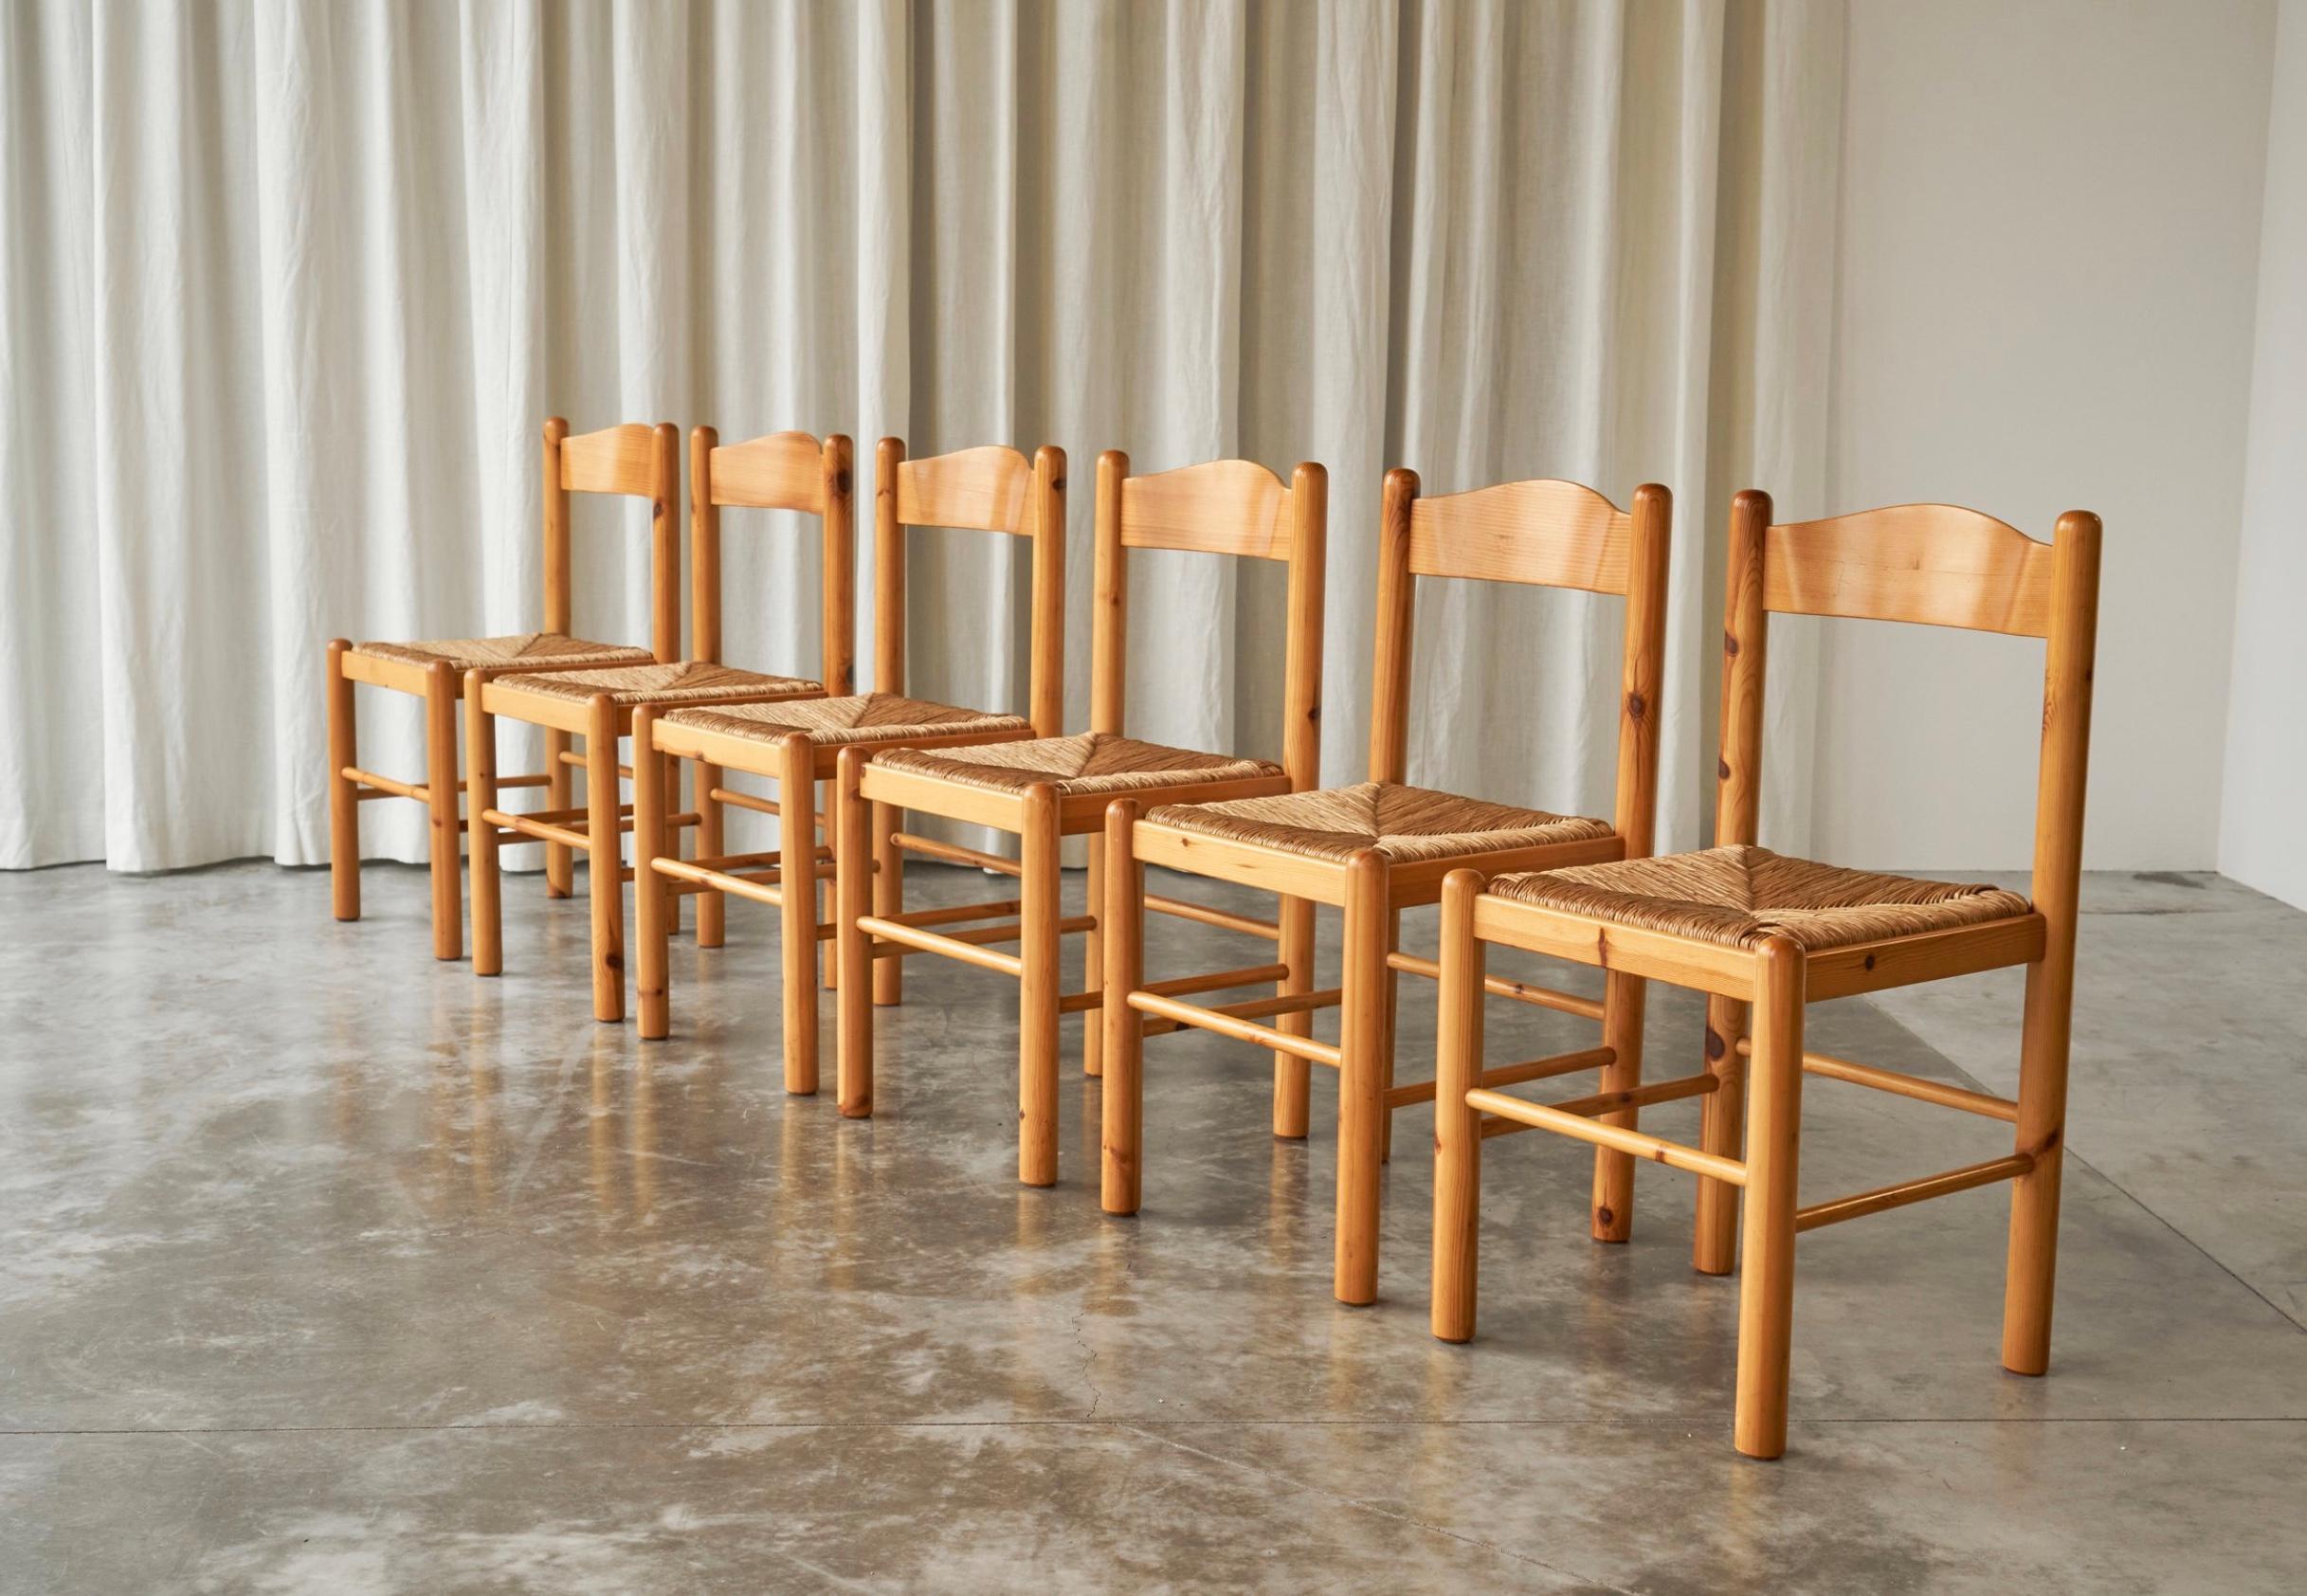 A great set of 6 dining chairs in expressive pine and rush, made somewhere in the 1960s. 

This is a set of true modernist chalet style chairs with hints of resemblance related to pieces by Charlotte Perriand or the Carimate chairs by Vico